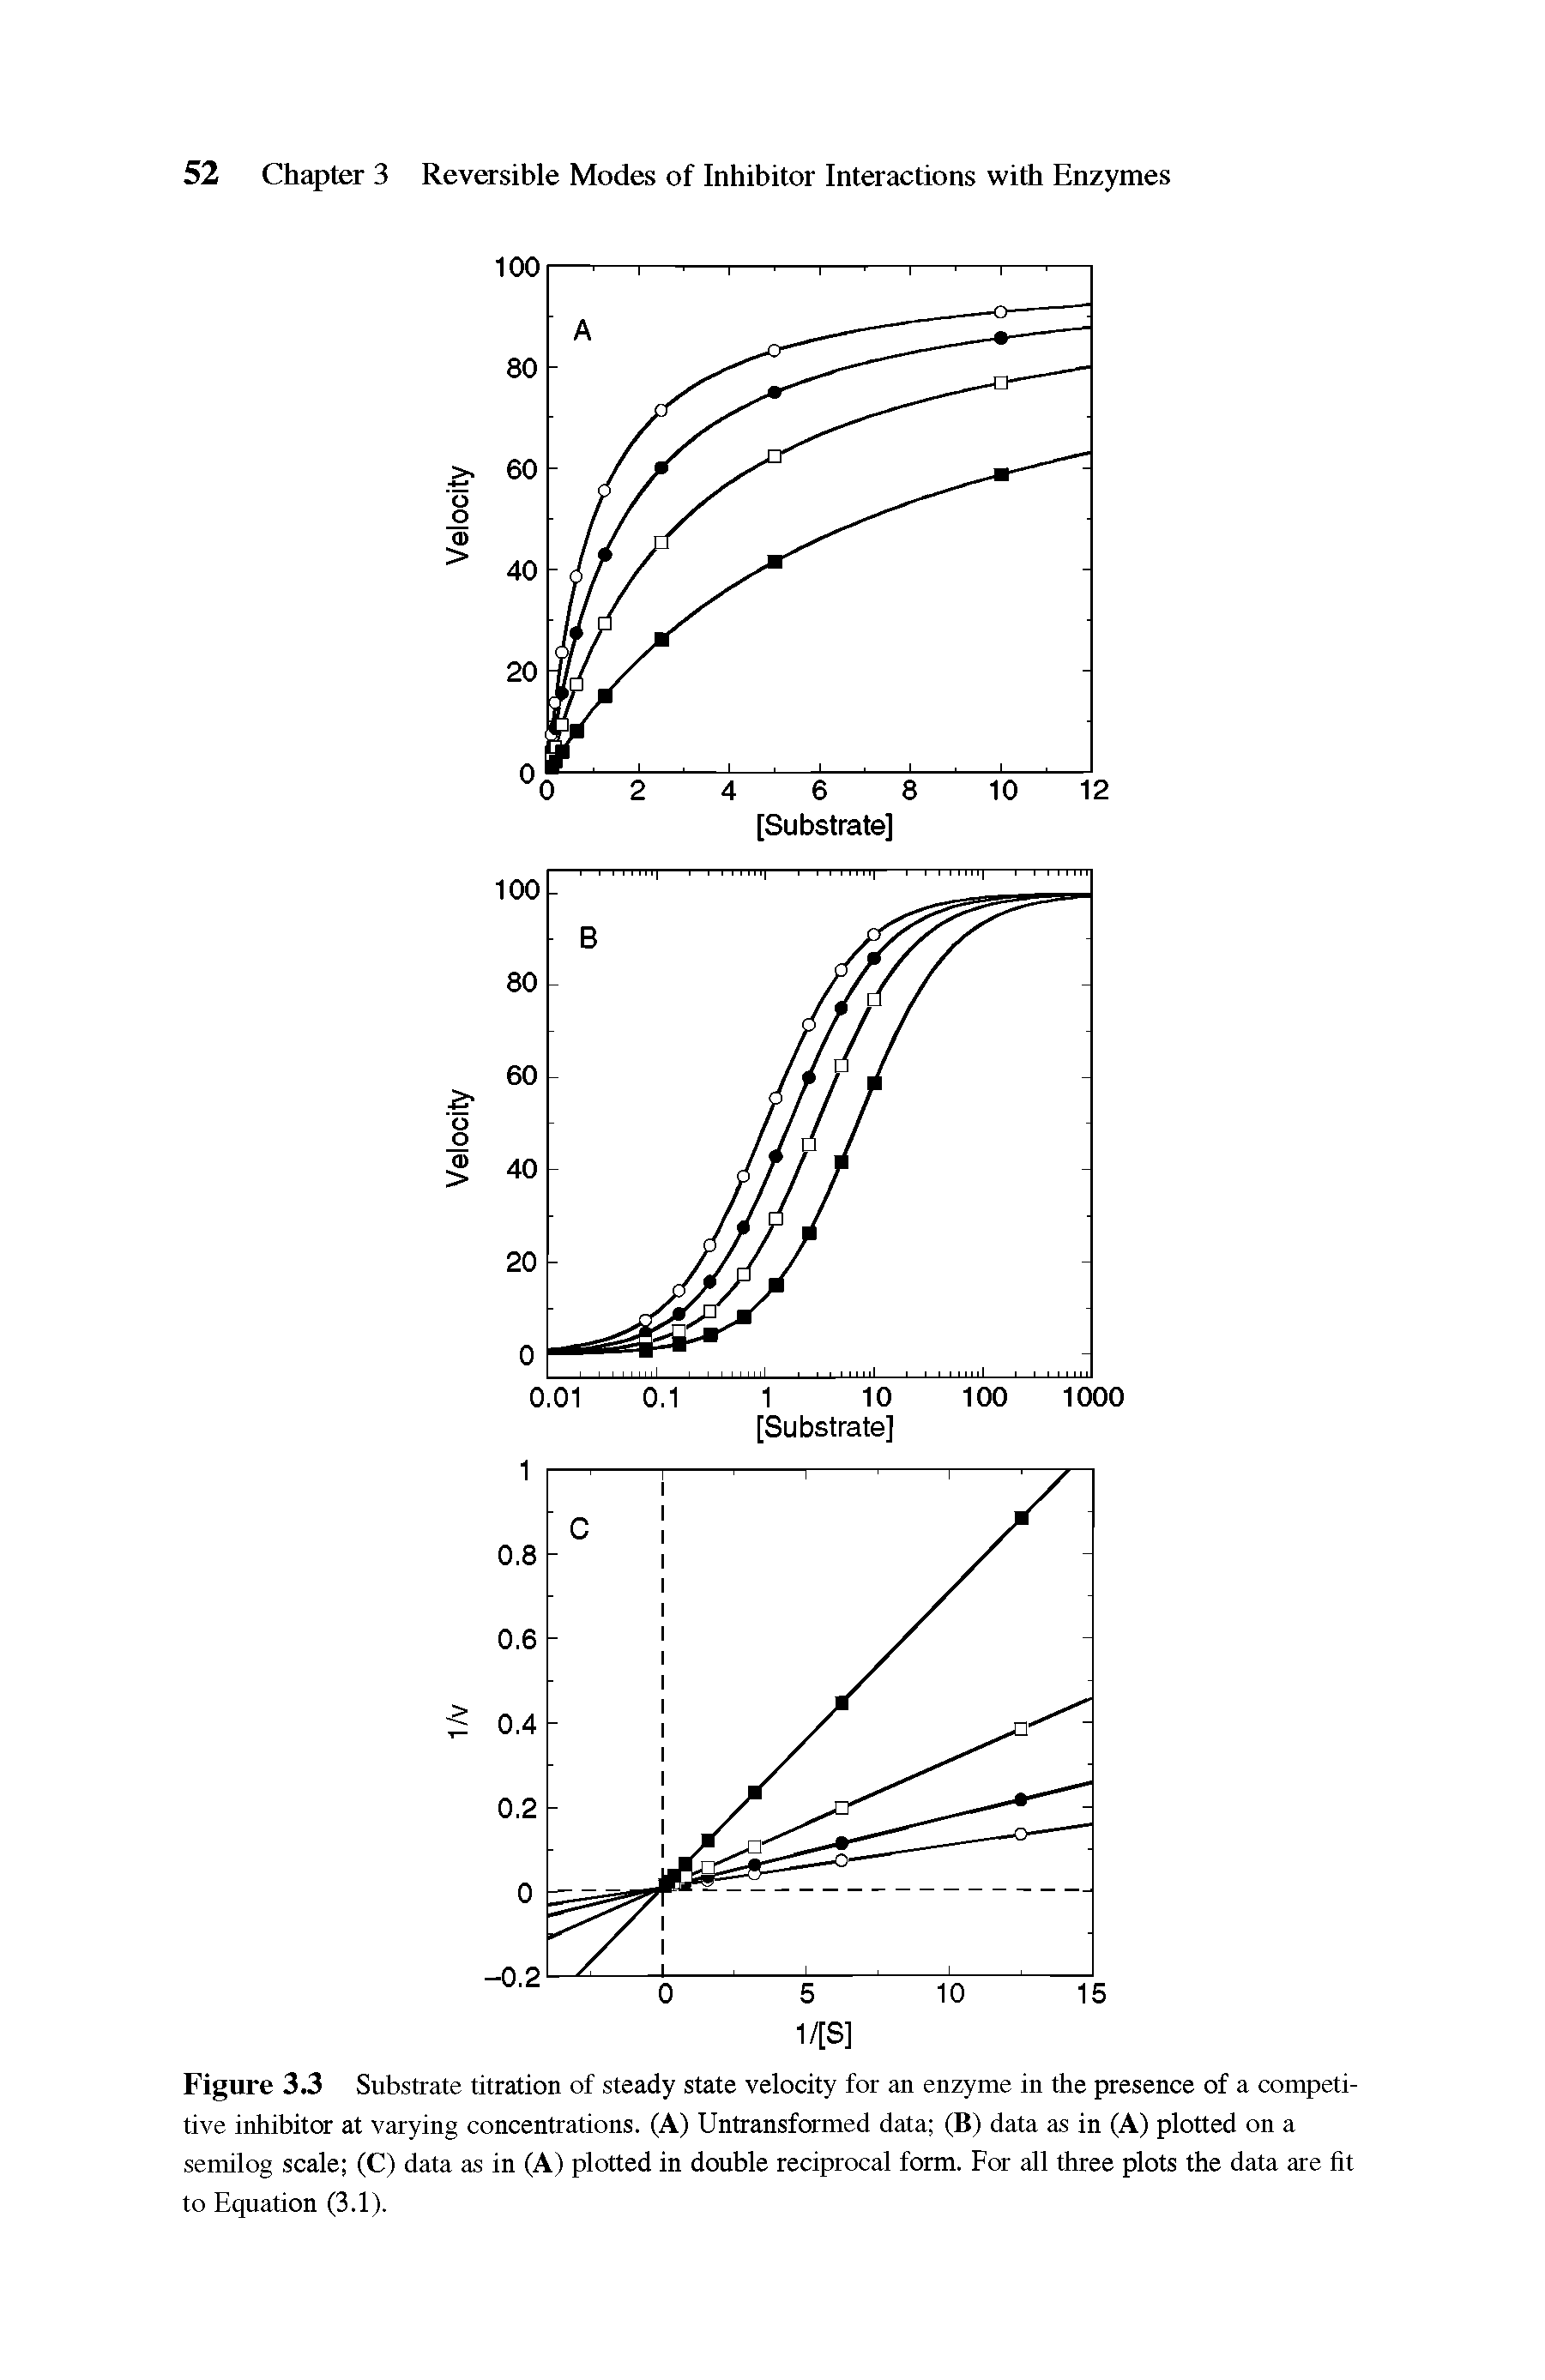 Figure 3.3 Substrate titration of steady state velocity for an enzyme in the presence of a competitive inhibitor at varying concentrations. (A) Untransformed data (B) data as in (A) plotted on a semilog scale (C) data as in (A) plotted in double reciprocal form. For all three plots the data are fit to Equation (3.1).